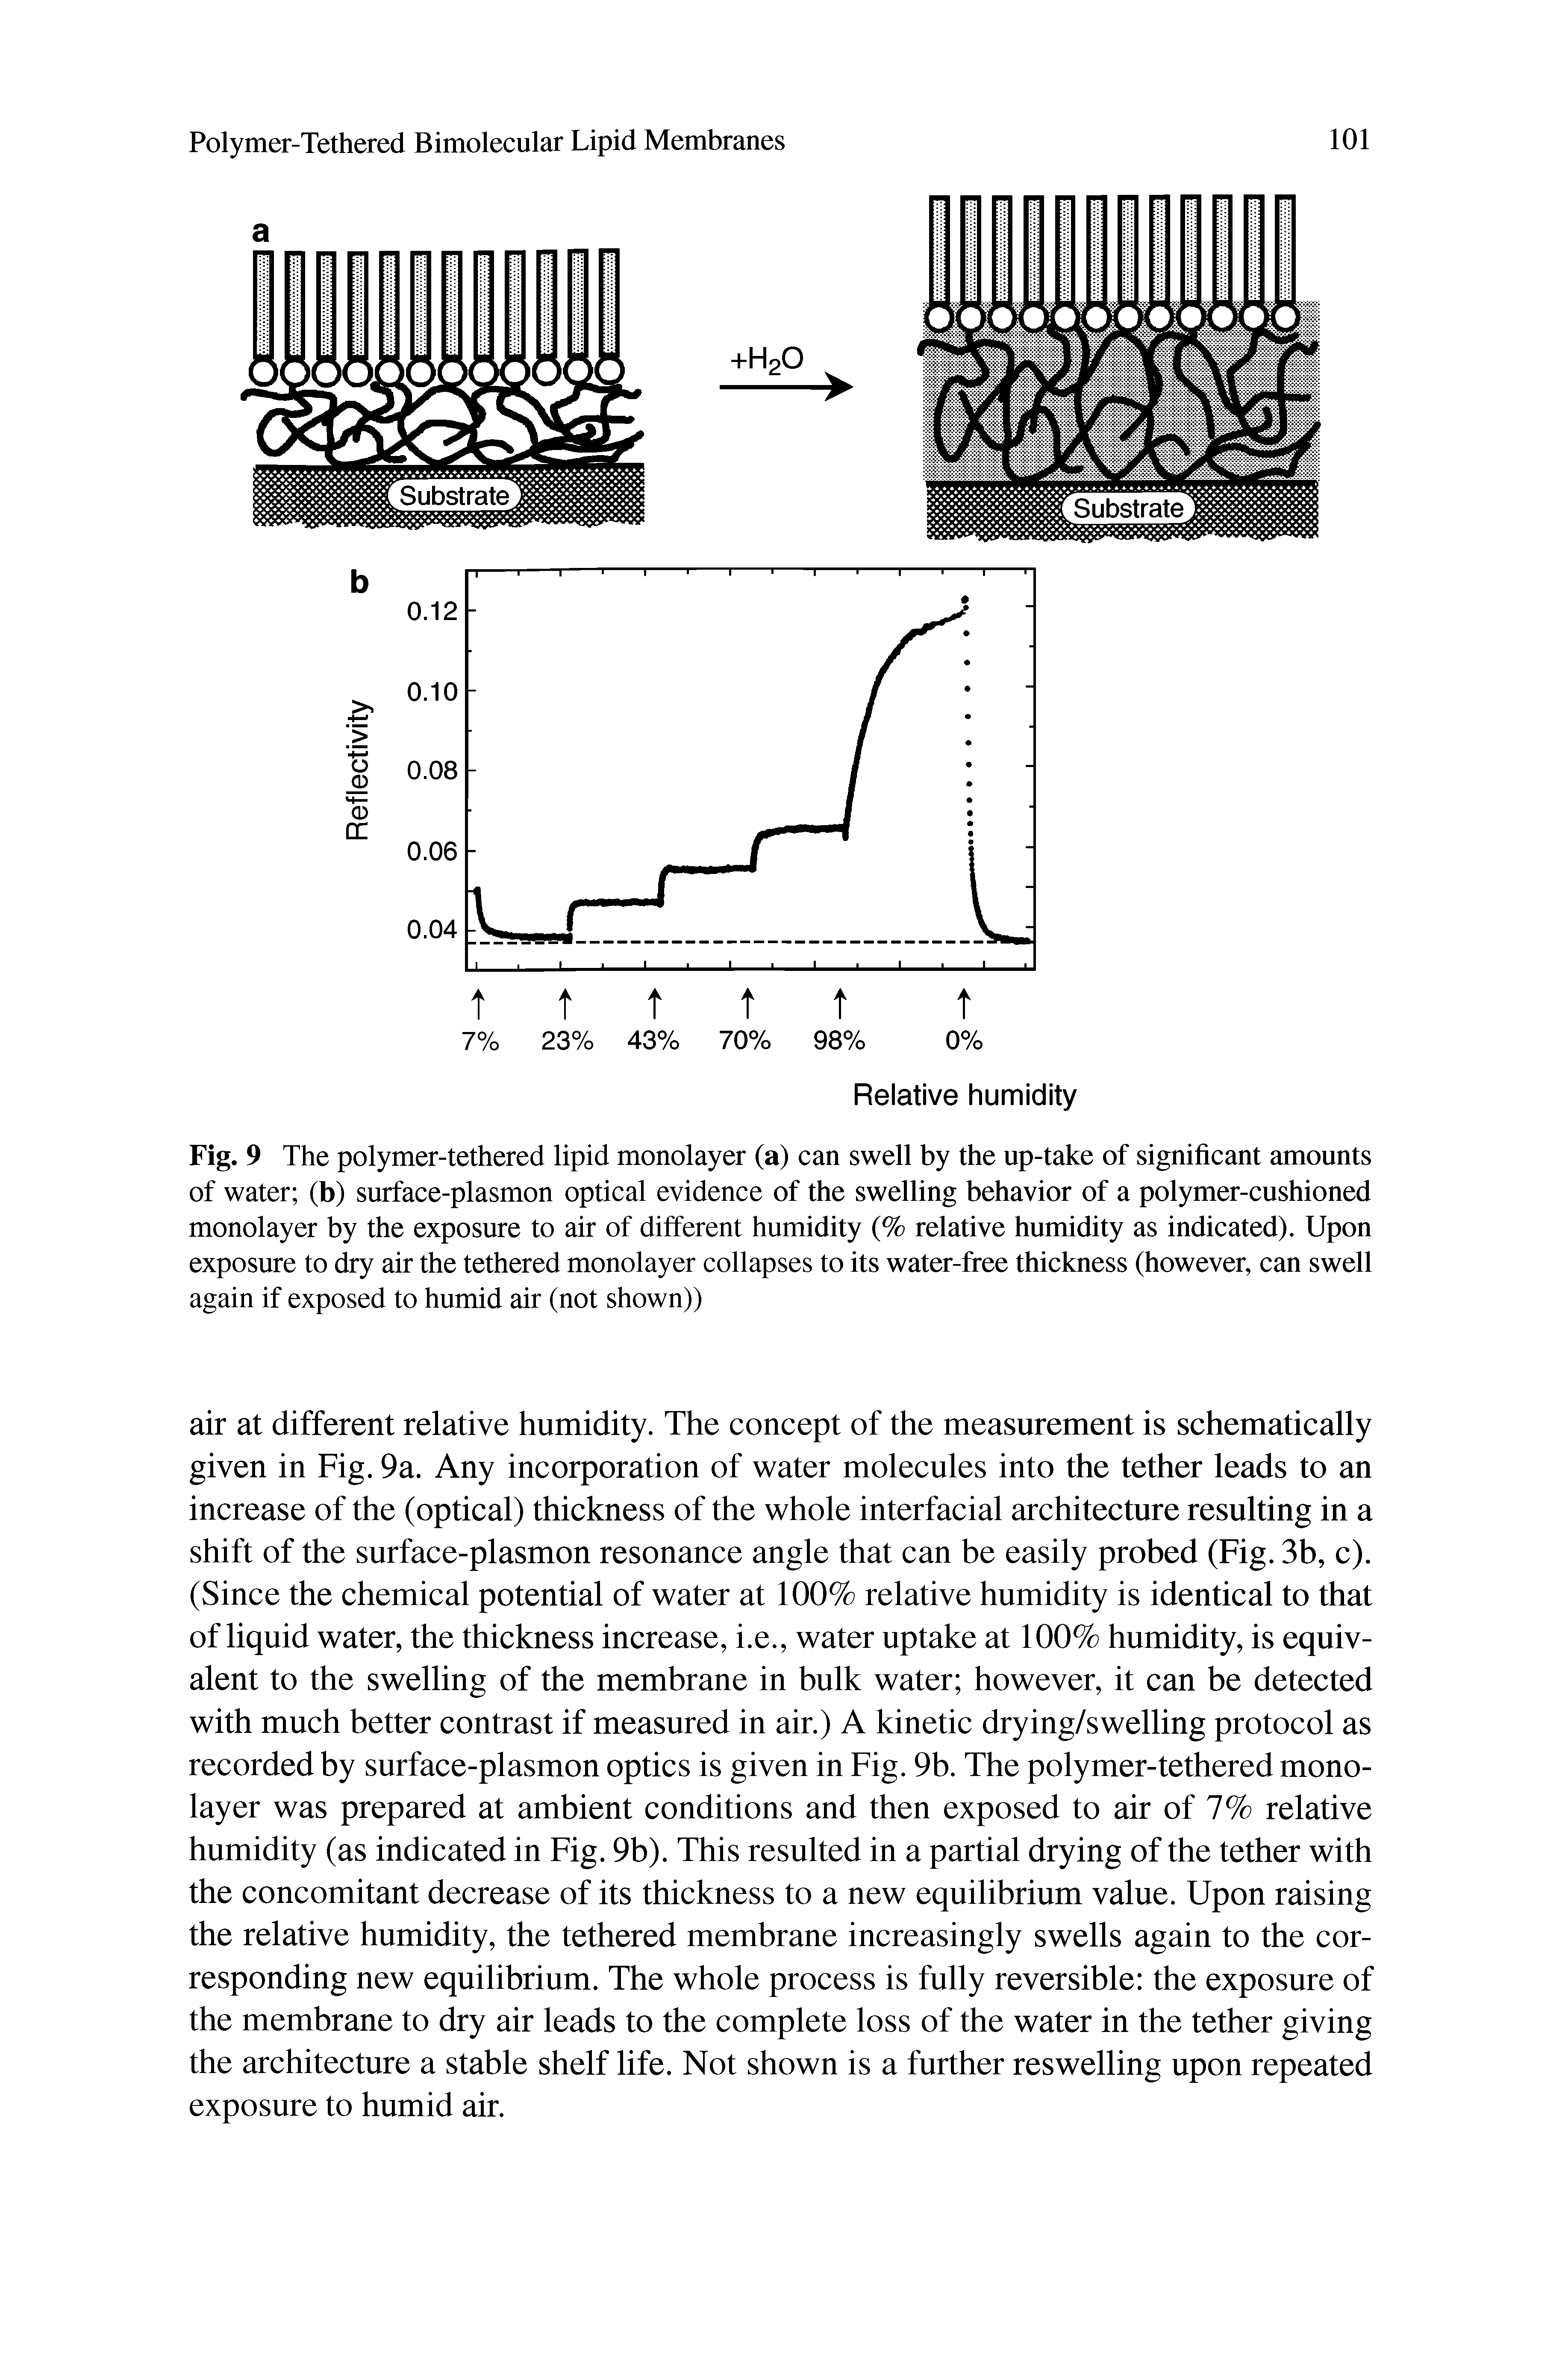 Fig. 9 The polymer-tethered lipid monolayer (a) can swell by the up-take of significant amounts of water (b) surface-plasmon optical evidence of the swelling behavior of a polymer-cushioned monolayer by the exposure to air of different humidity (% relative humidity as indicated). Upon exposure to dry air the tethered monolayer collapses to its water-free thickness (however, can swell again if exposed to humid air (not shown))...